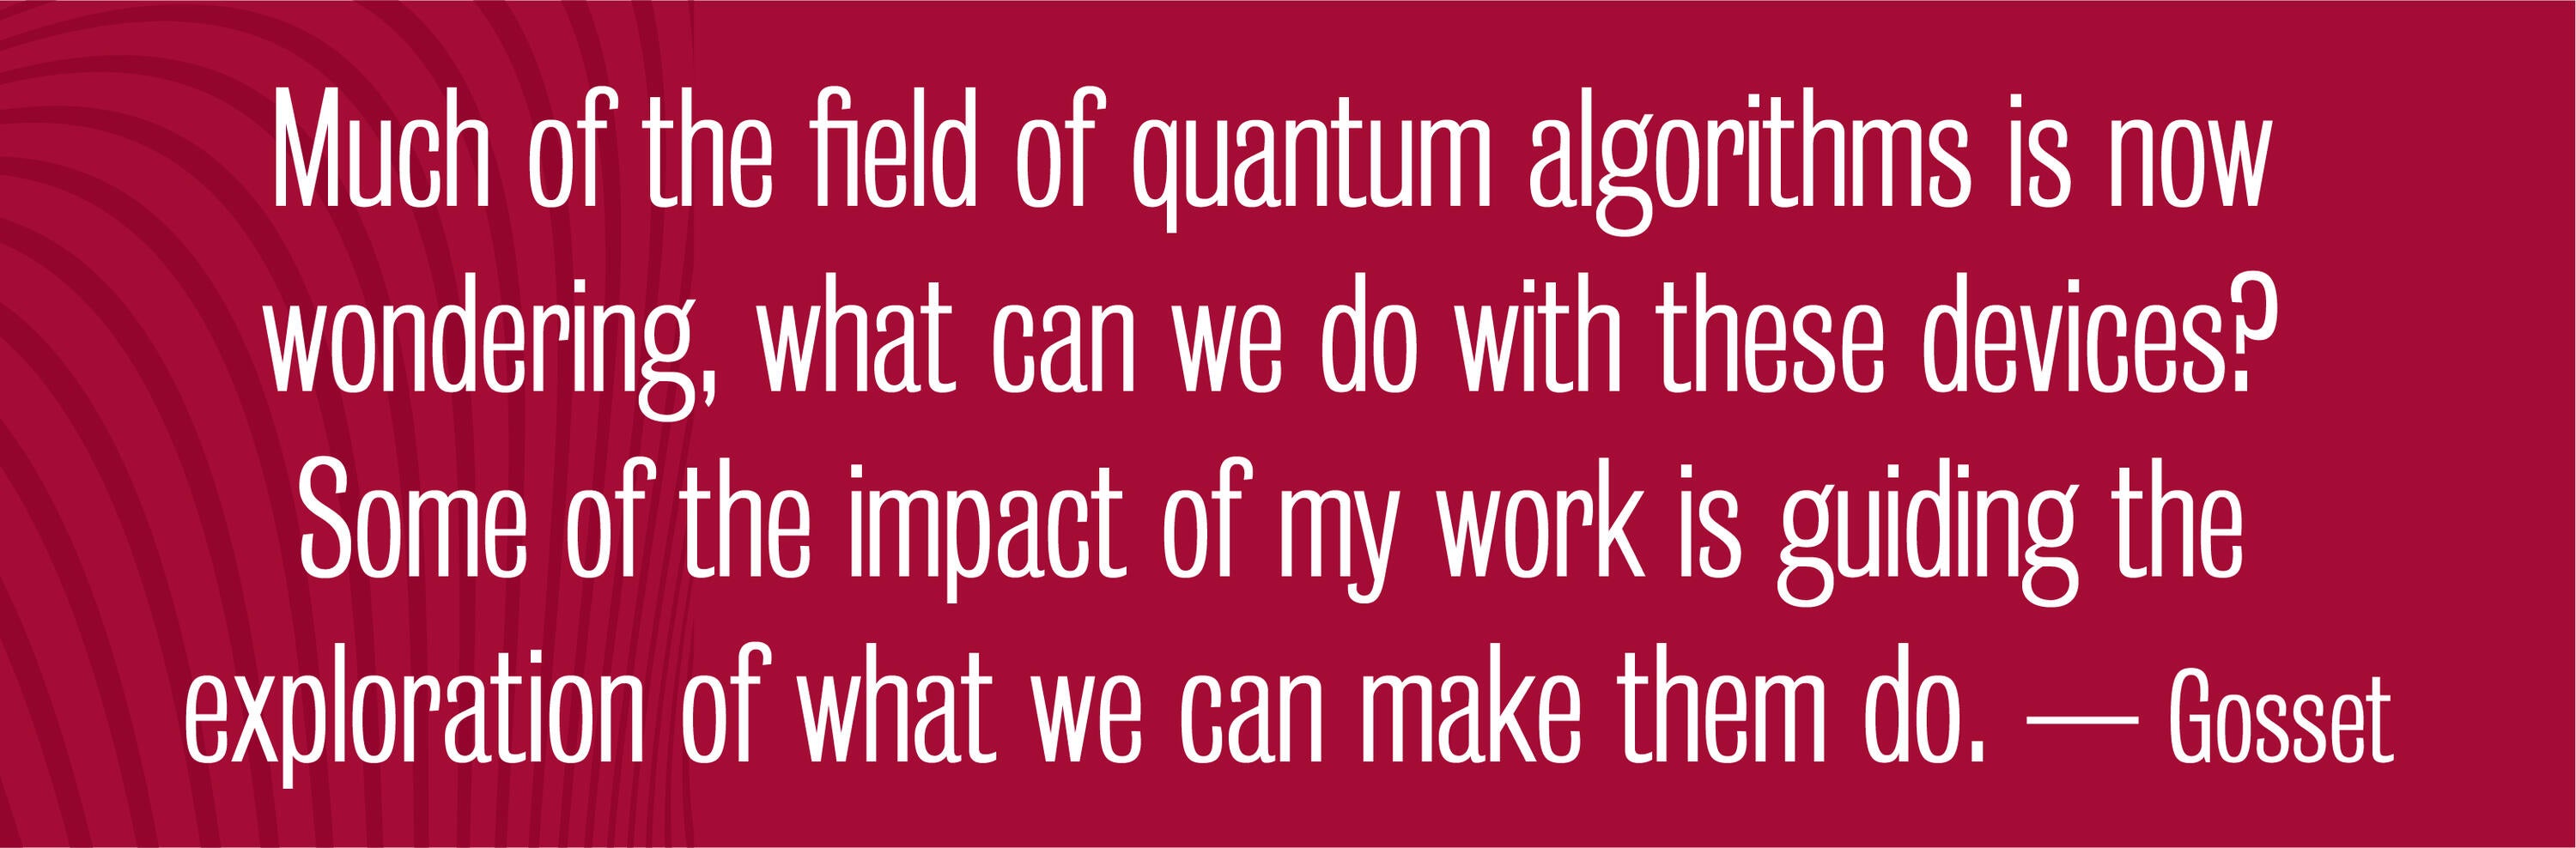 Quote - Much of the field of quantum algorithms is now  wondering, what can we do with these devices?  Some of the impact of my work is guiding the  exploration of what we can make them do.